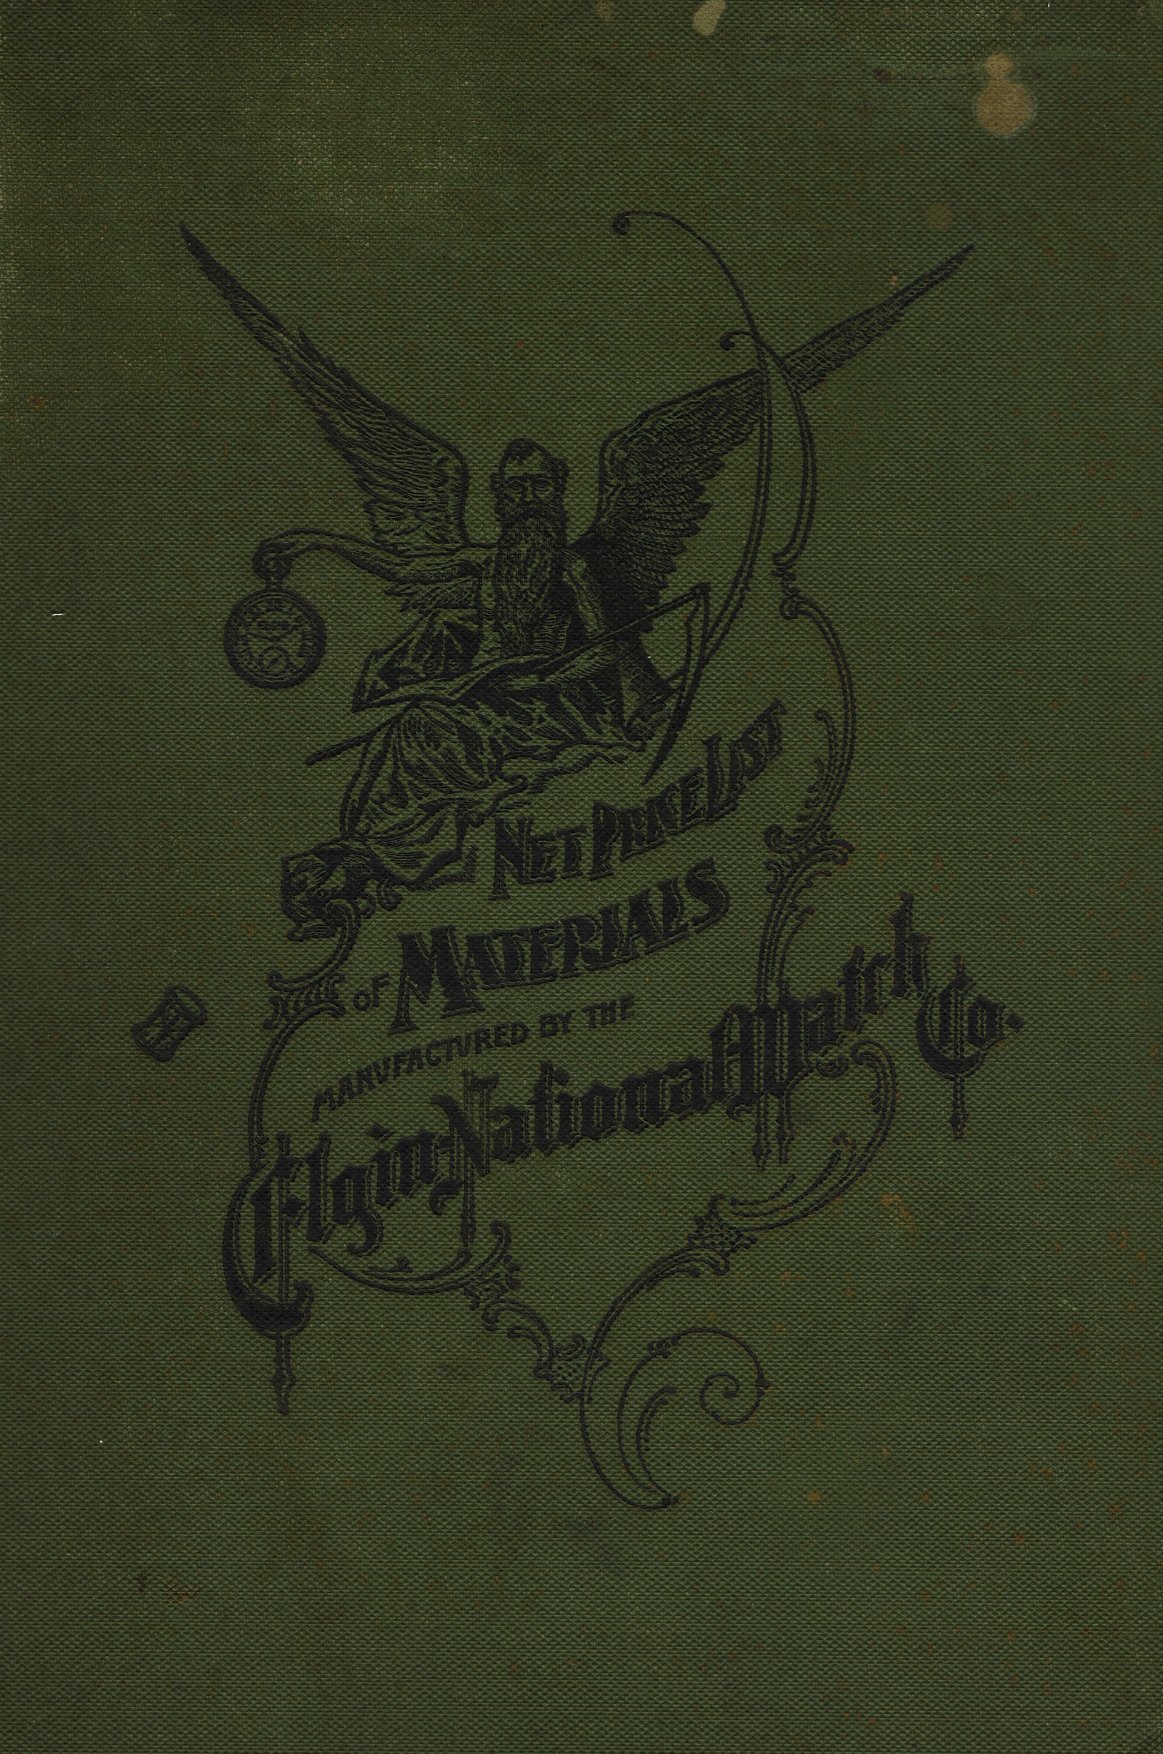 Net Price List of Materials Manufactured by the Elgin National Watch Co. (1915) Cover Image